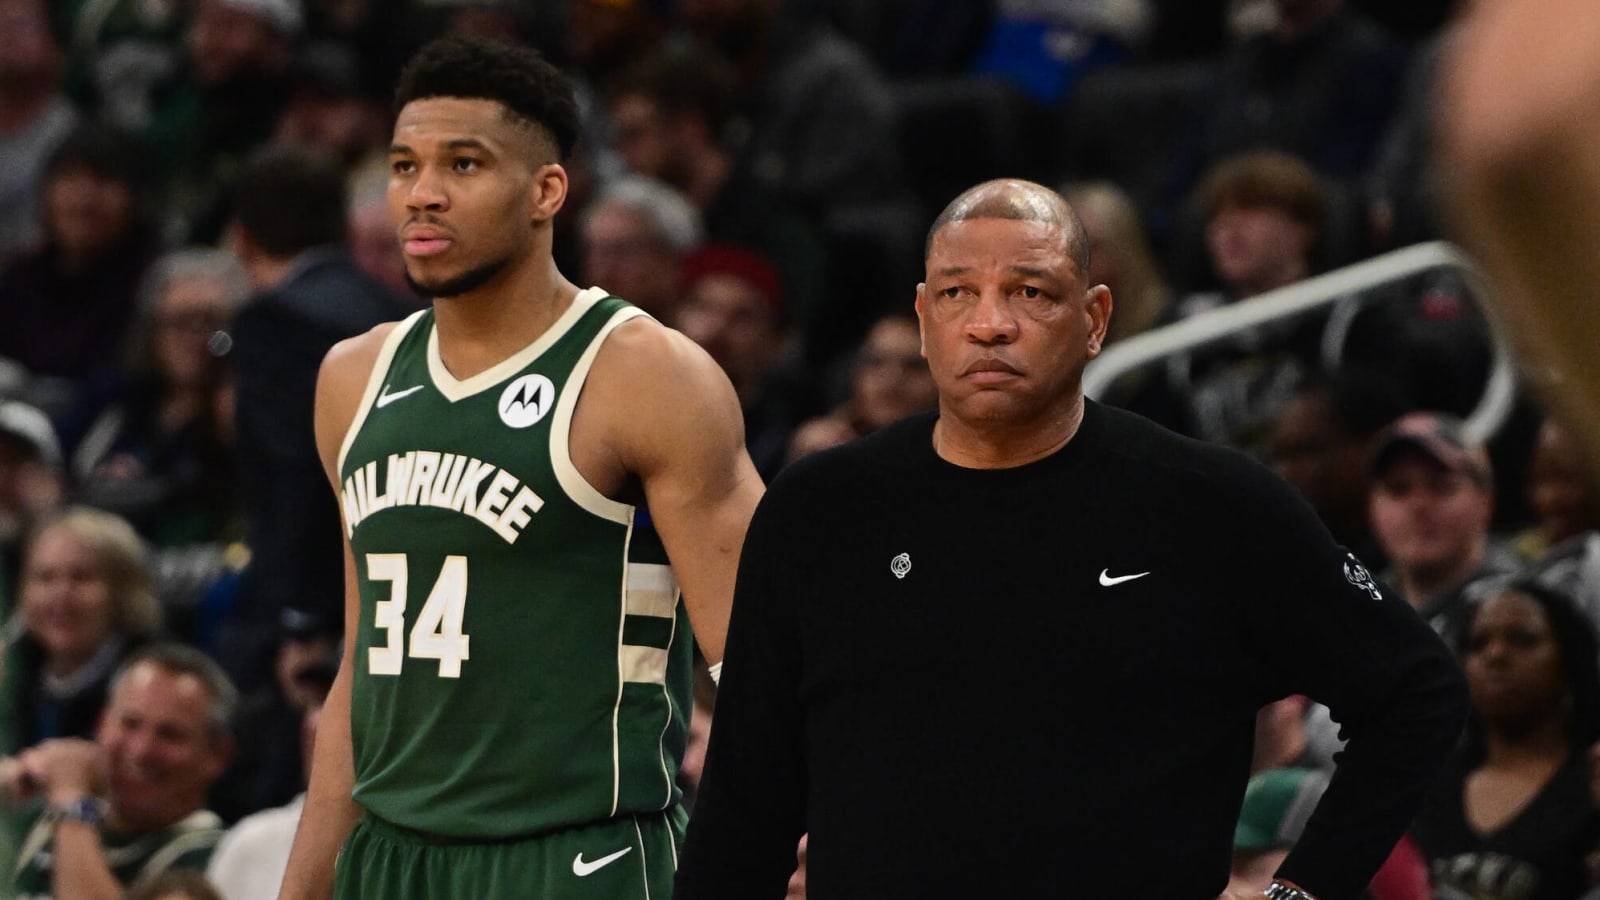 Bucks star's injury could spare his coach hard questions